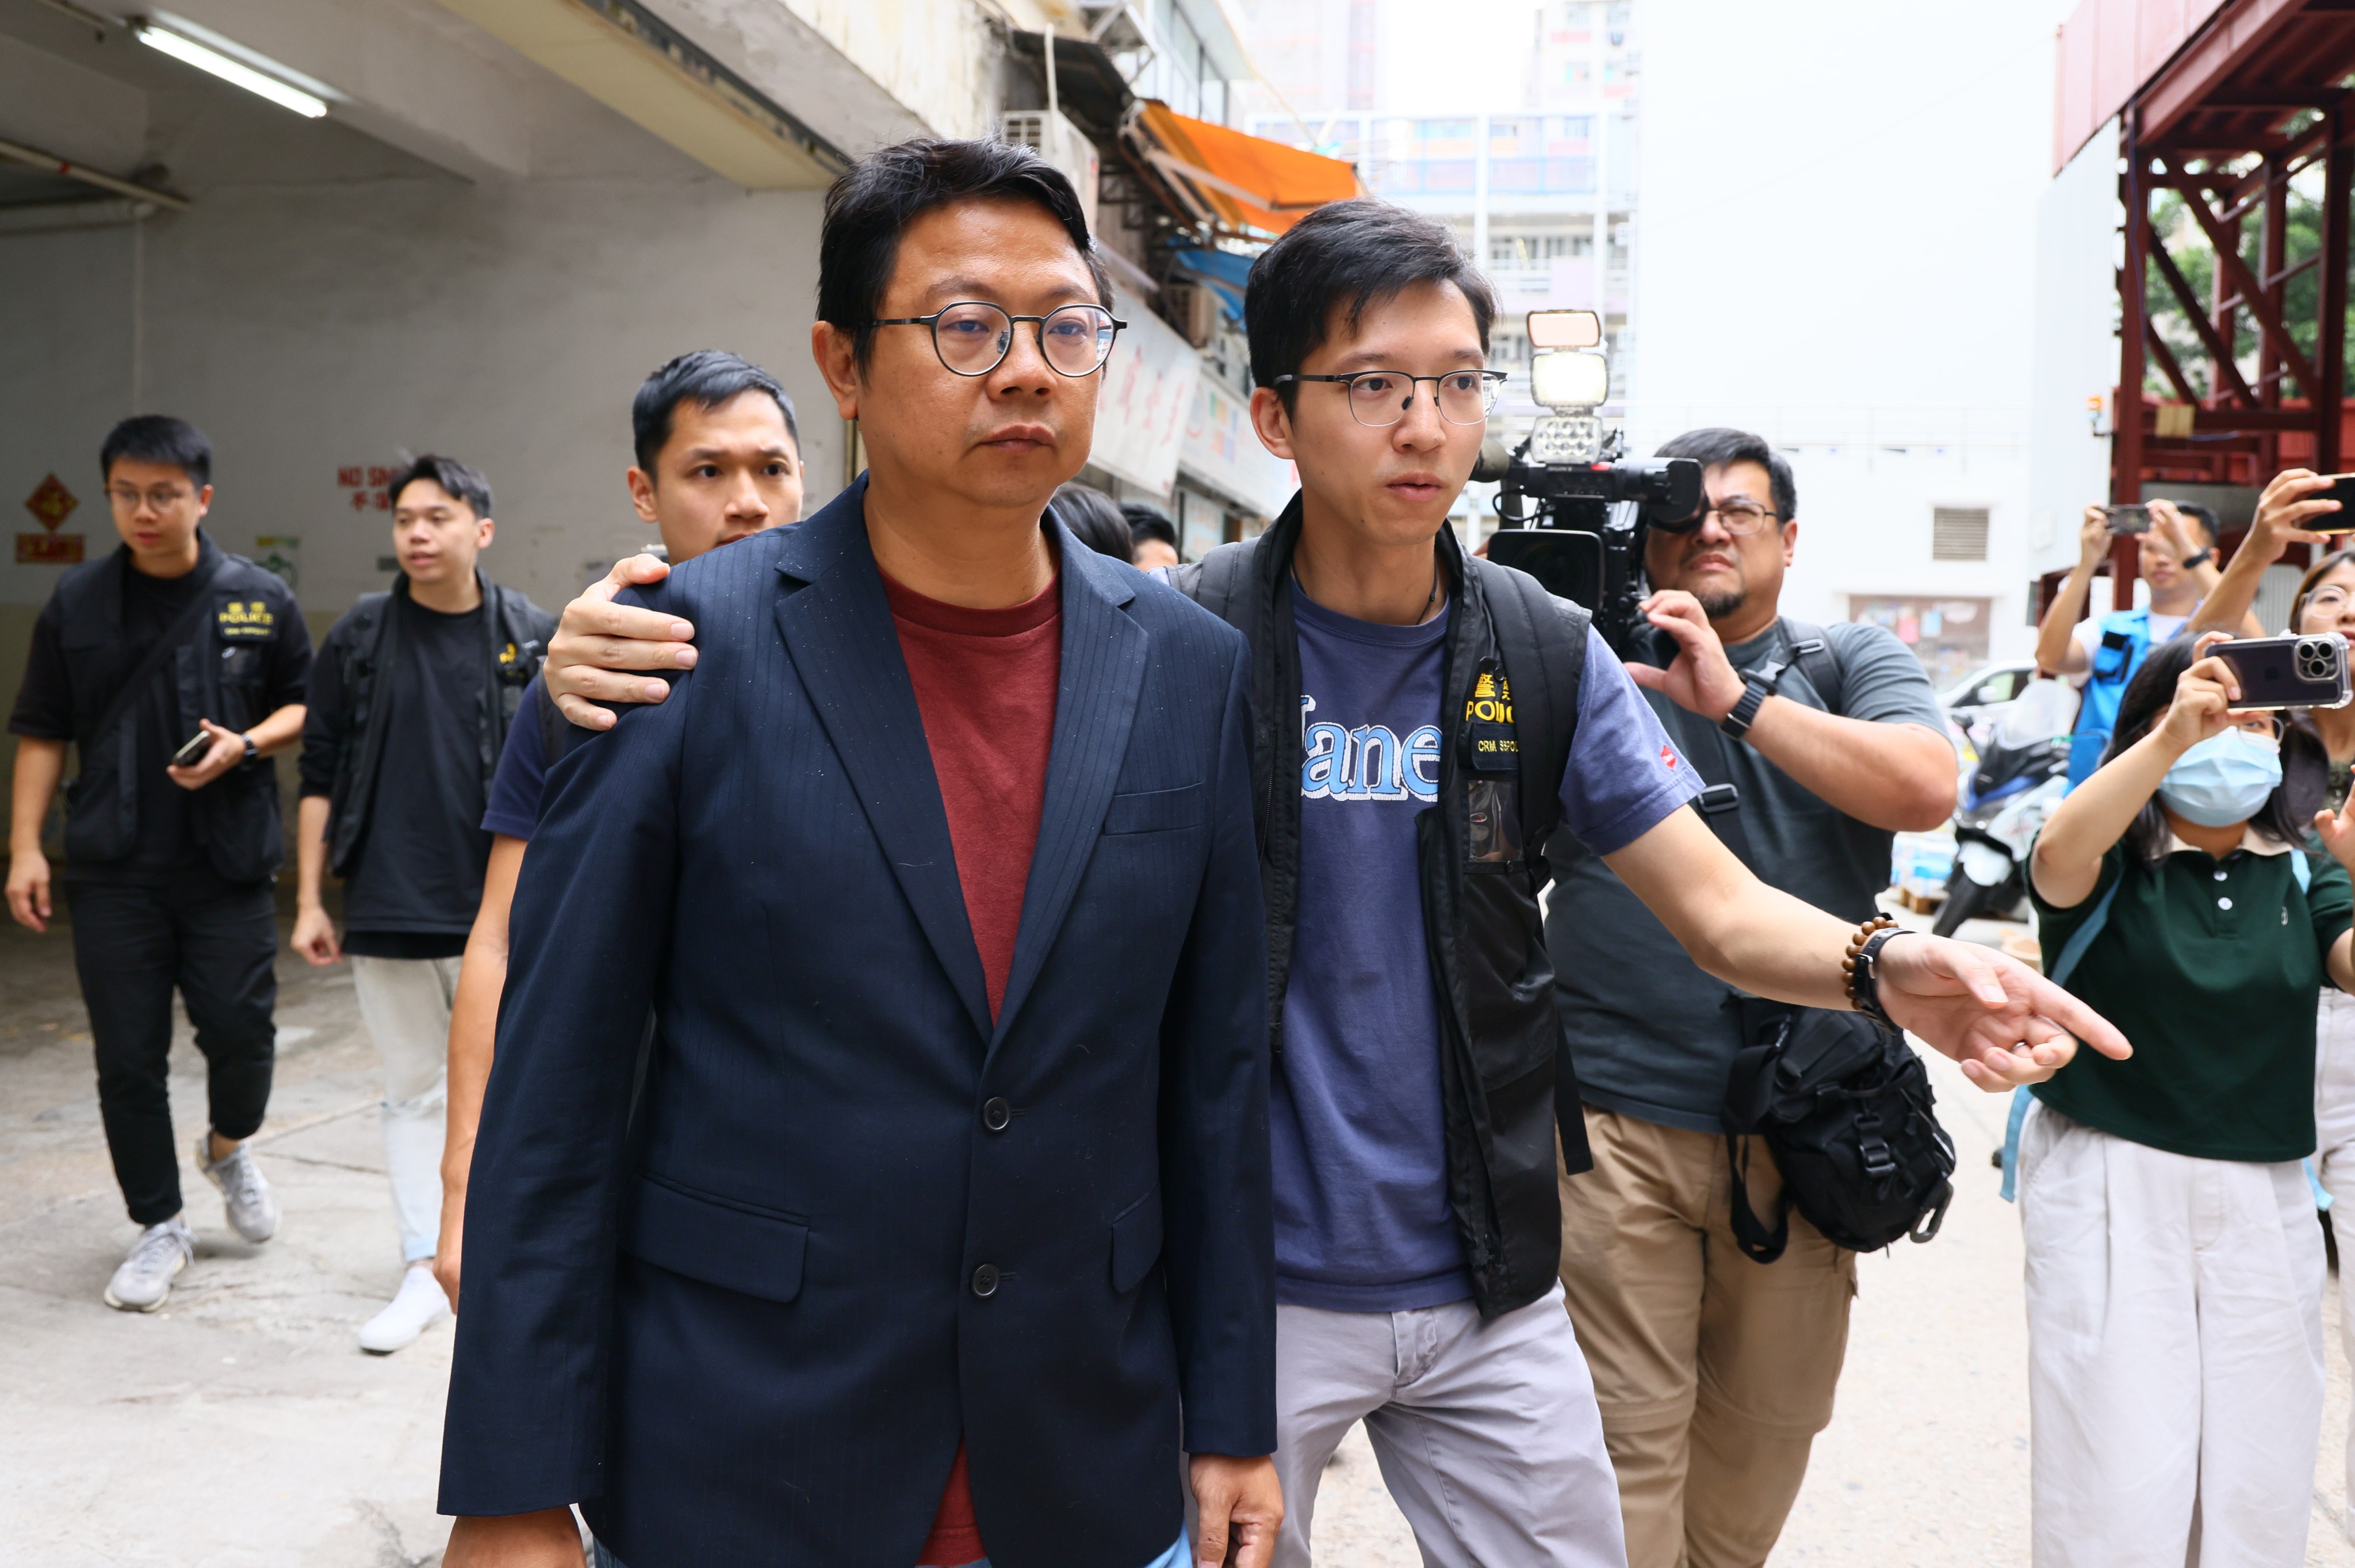 Chu Kong-wai (Left) is accused of promoting MPF schemes without proper registration. Photo: Dickson Lee